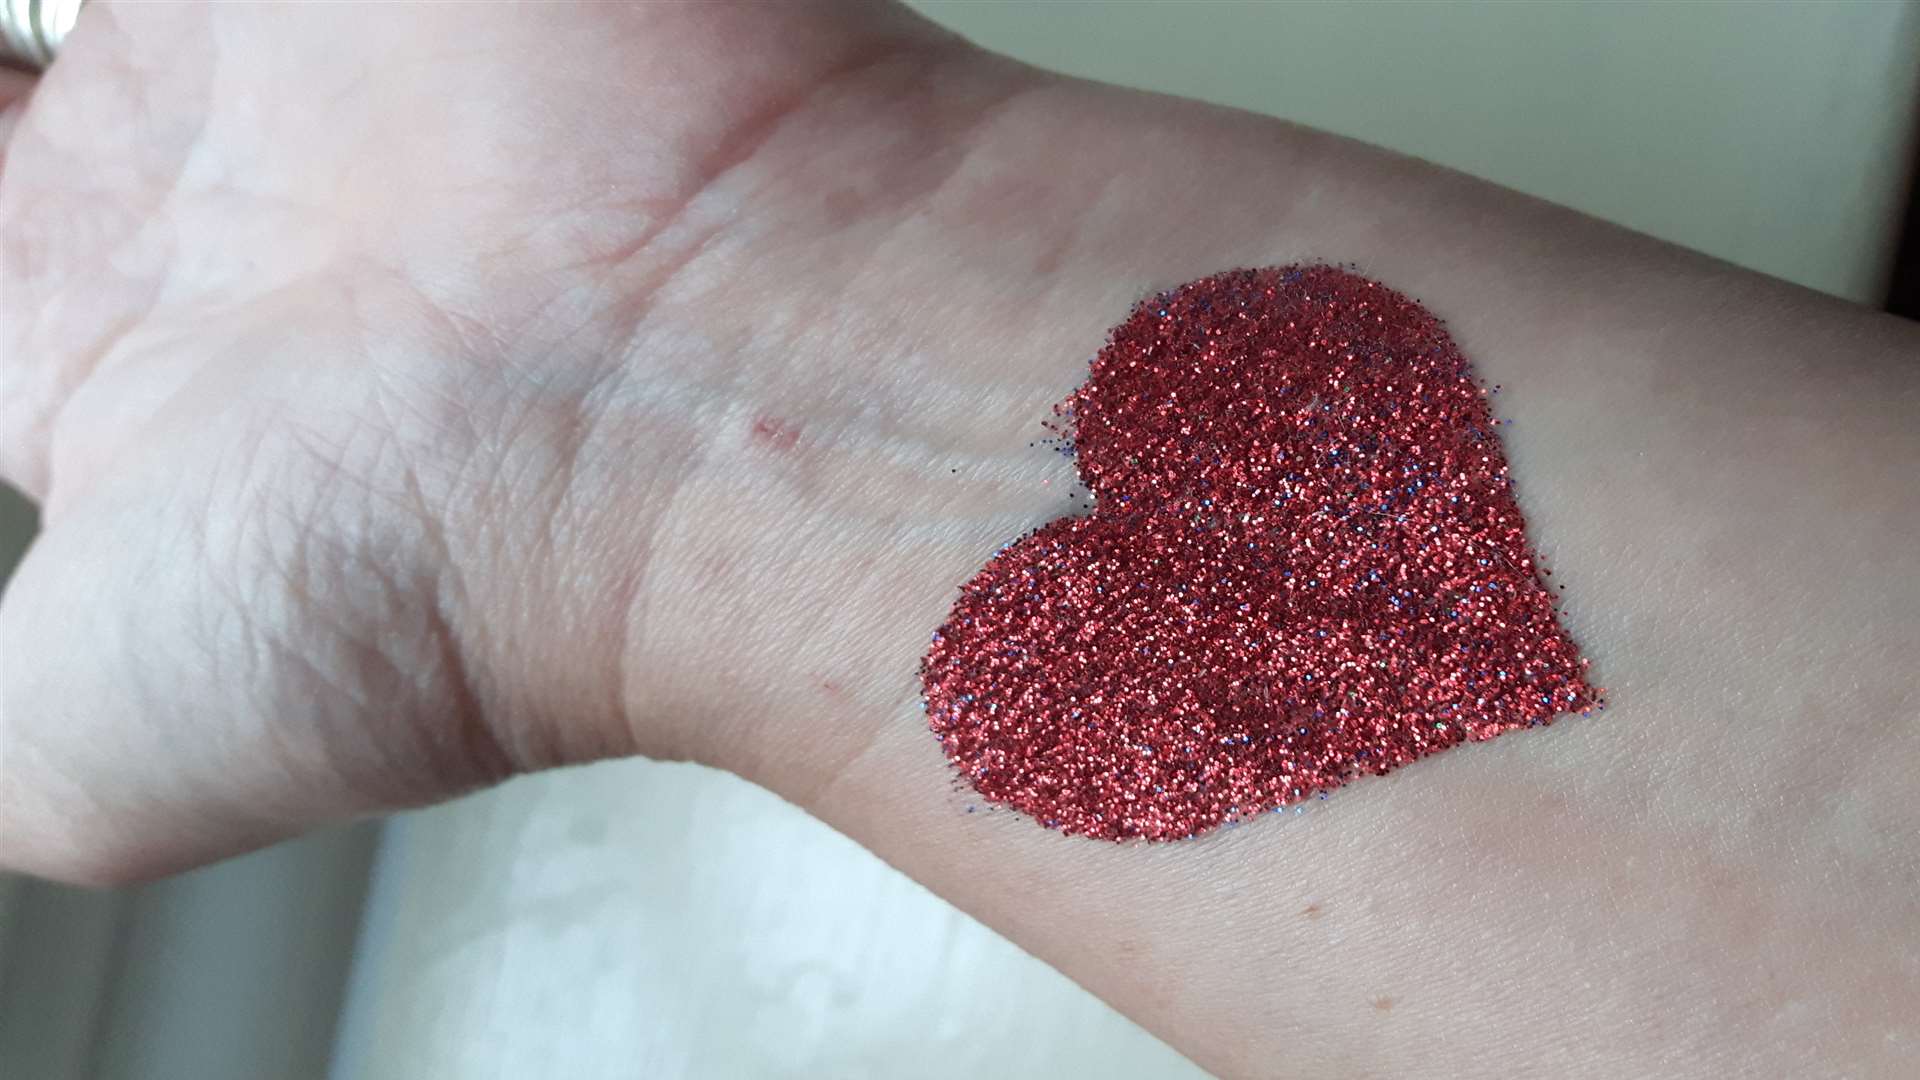 Glitter tattoos were a must at a four-year-old 's party